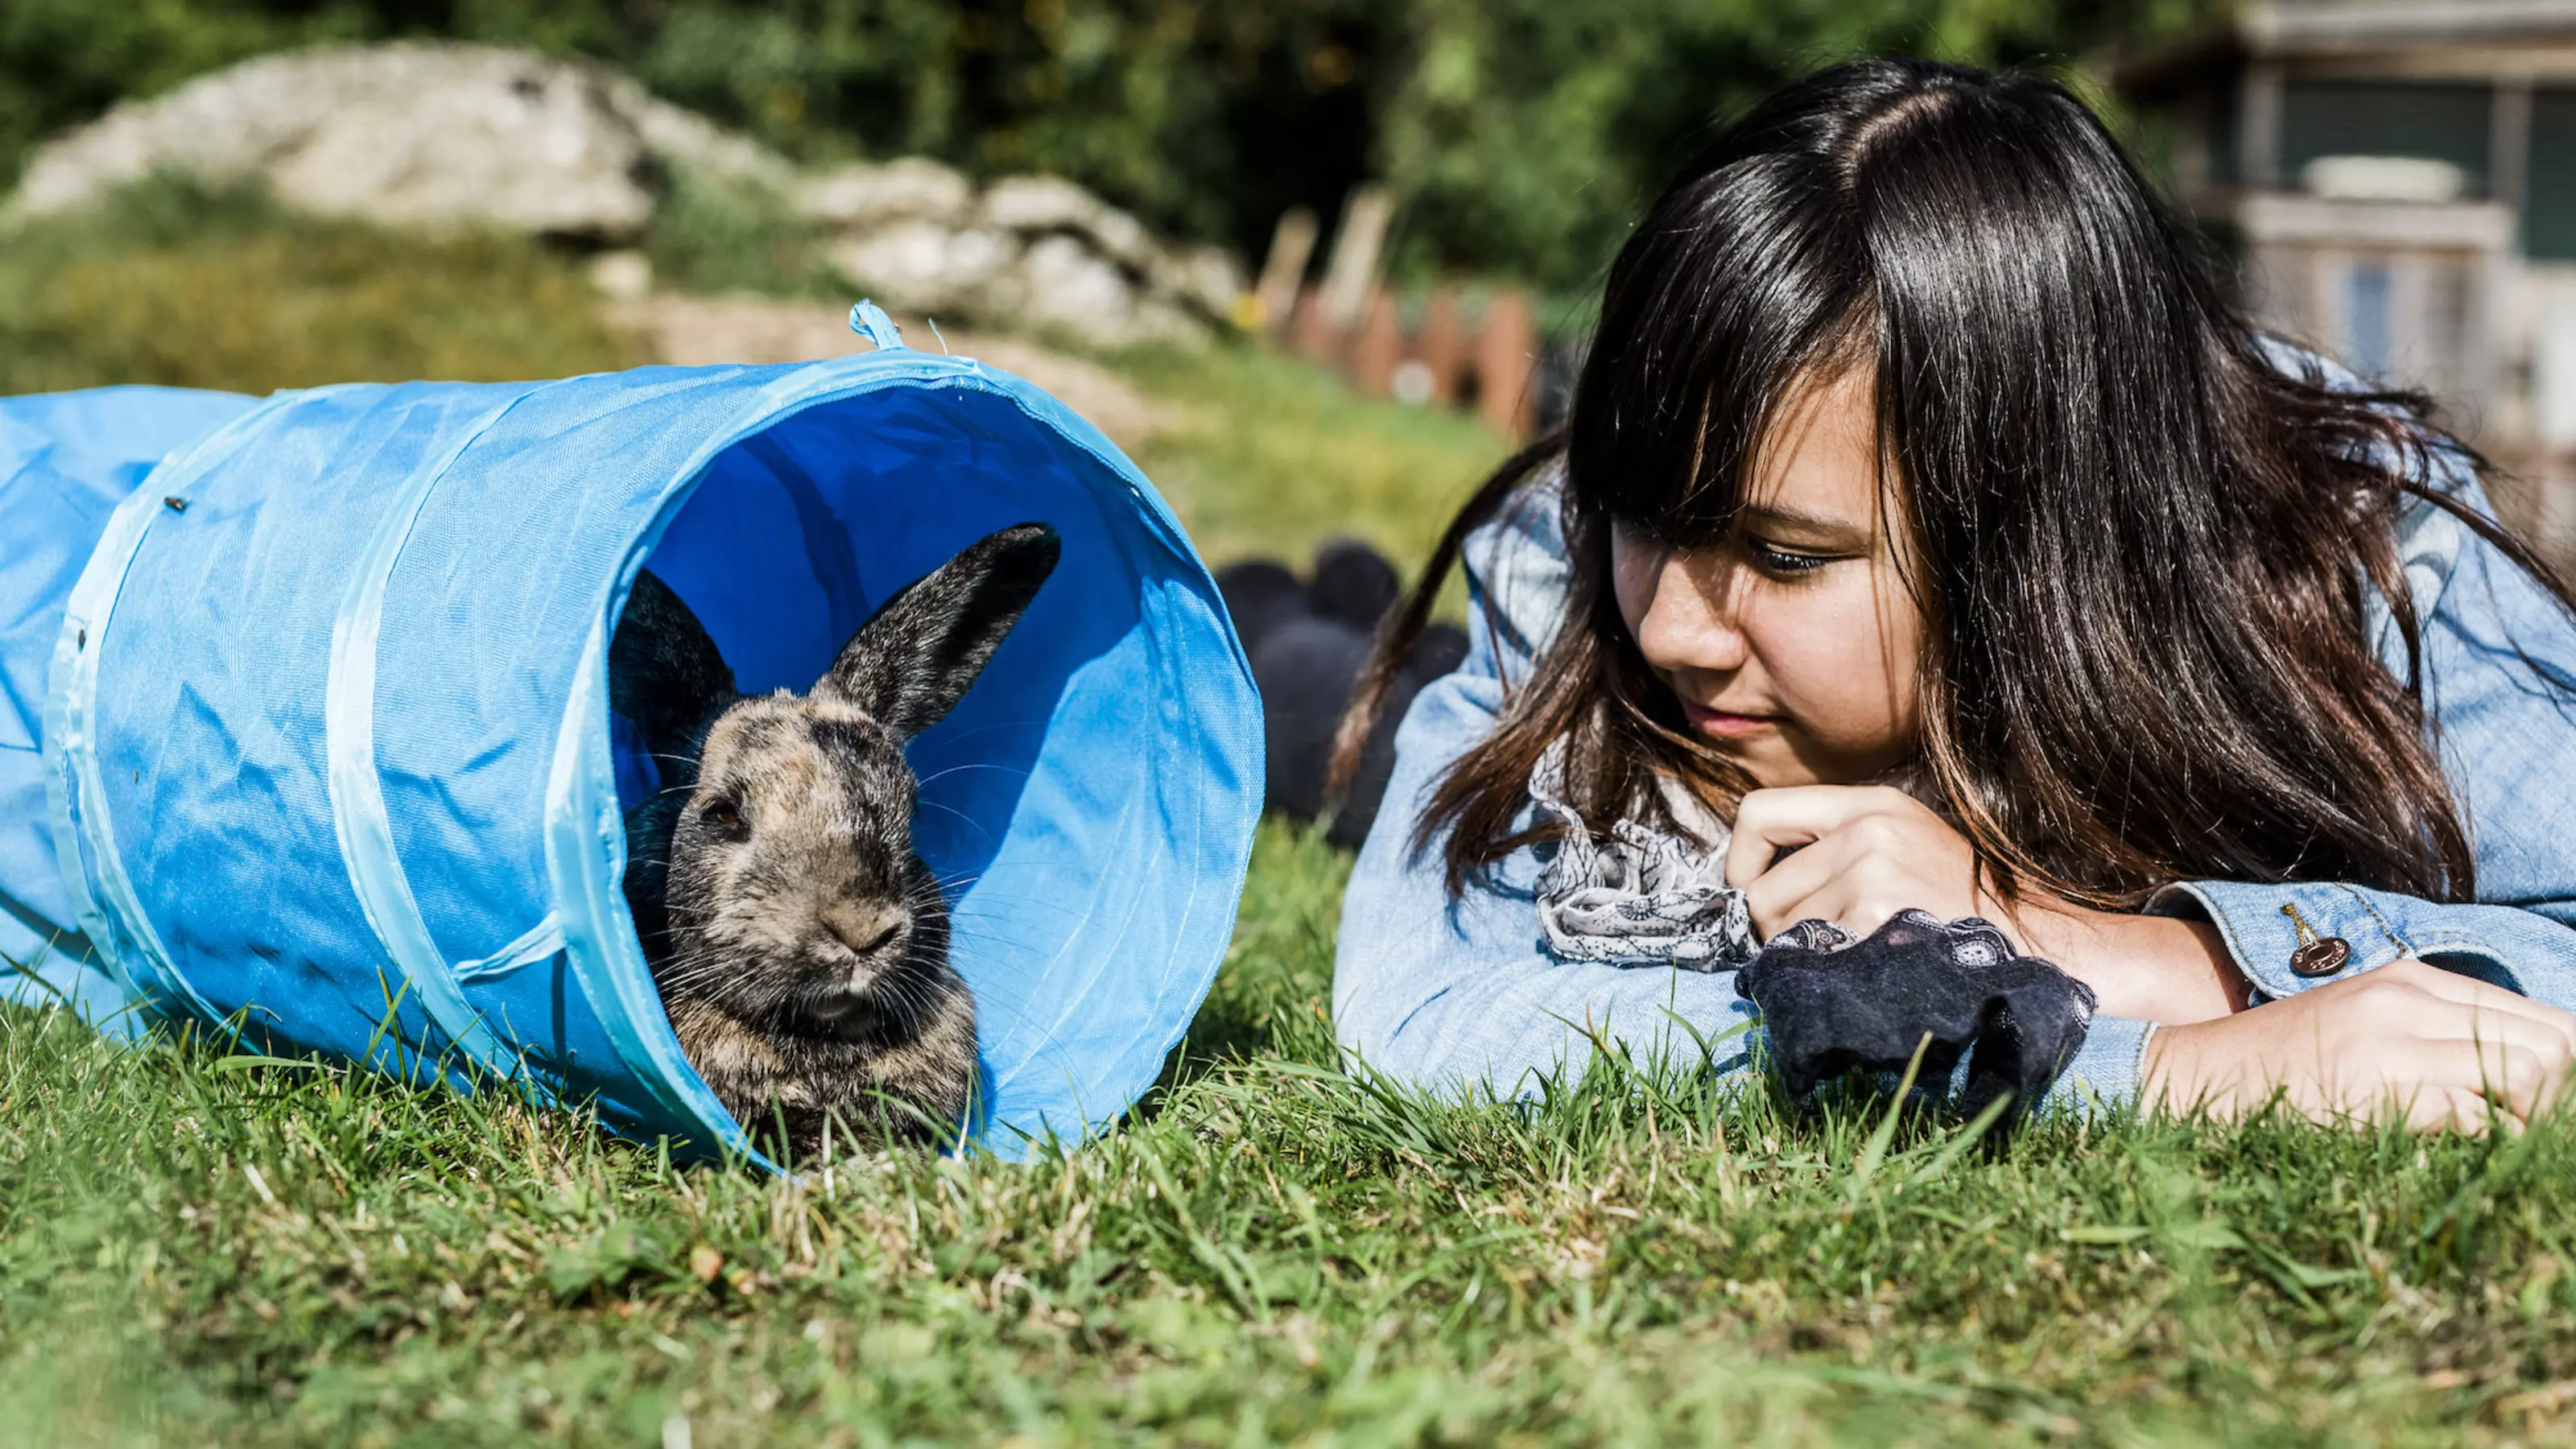 A young girl looks at a rabbit in a blue tunnel